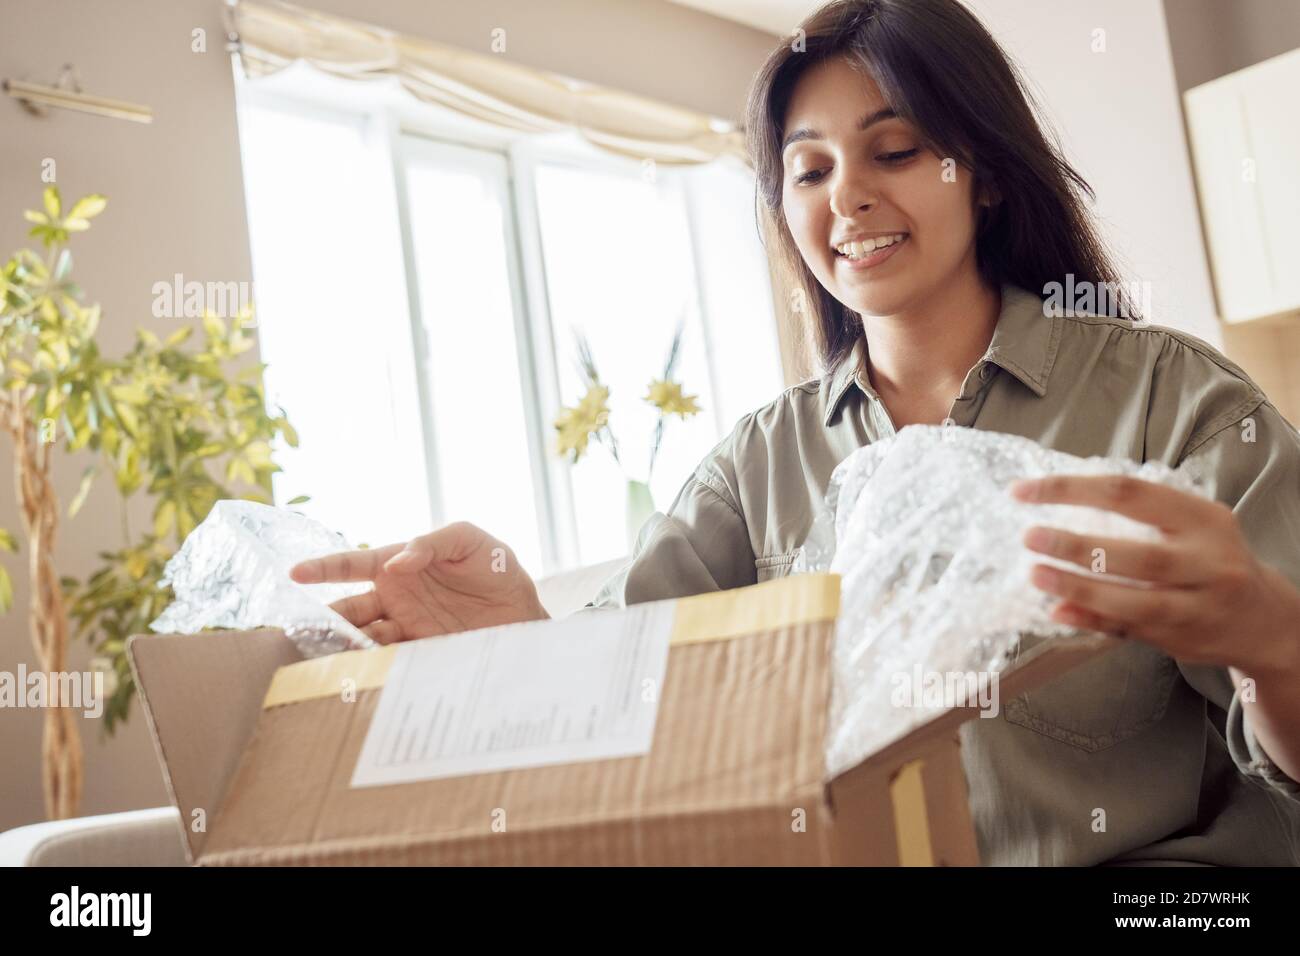 Smiling indian woman shopper customer opening post parcel box at home. Stock Photo